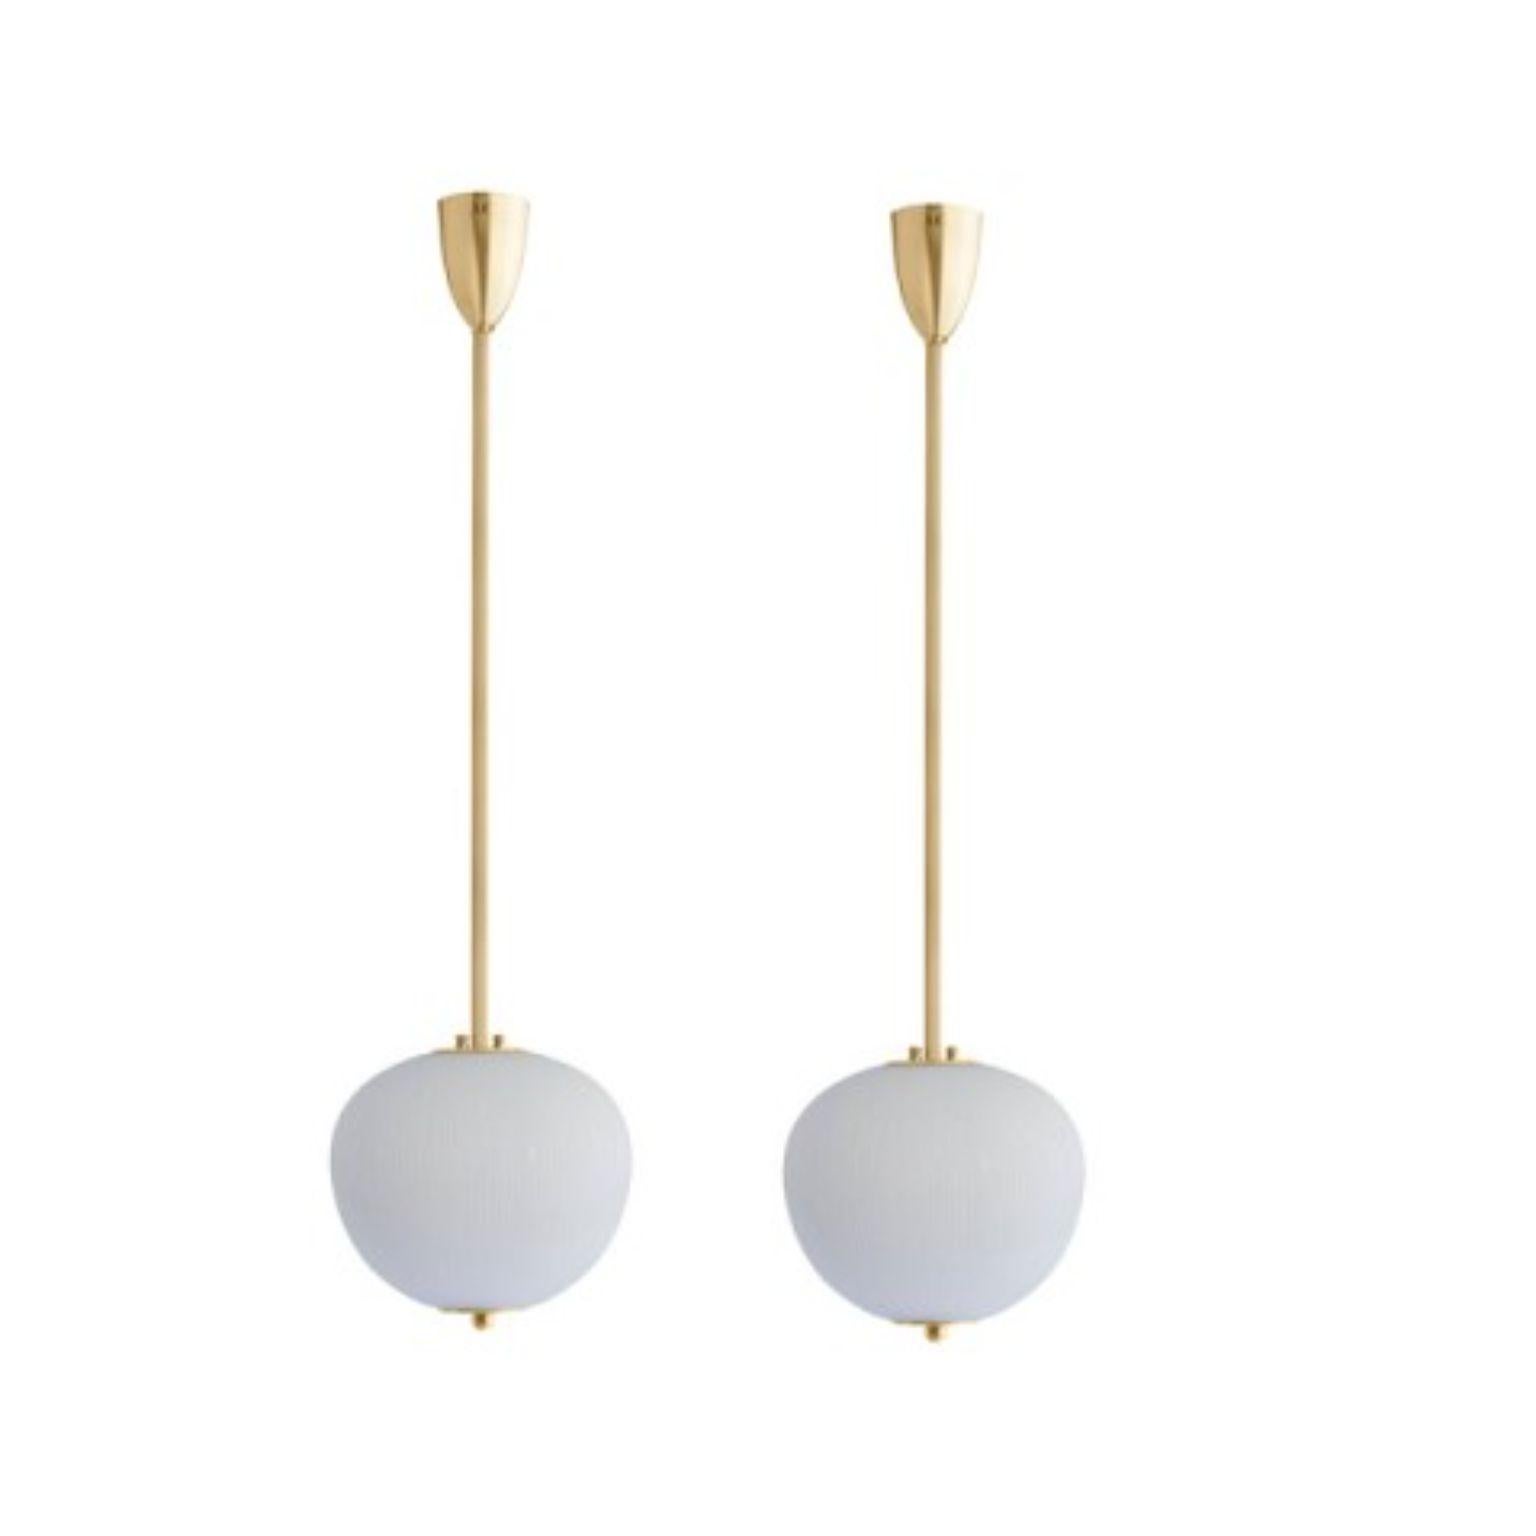 Pendant China 03 by Magic Circus Editions
Dimensions: H 90 x W 26.2 x D 26.2 cm, also available in H 110, 130, 150, 175, 190
Materials: brass, mouth blown glass sculpted with a diamond saw
Colour: rich grey

Available finishes: Brass,